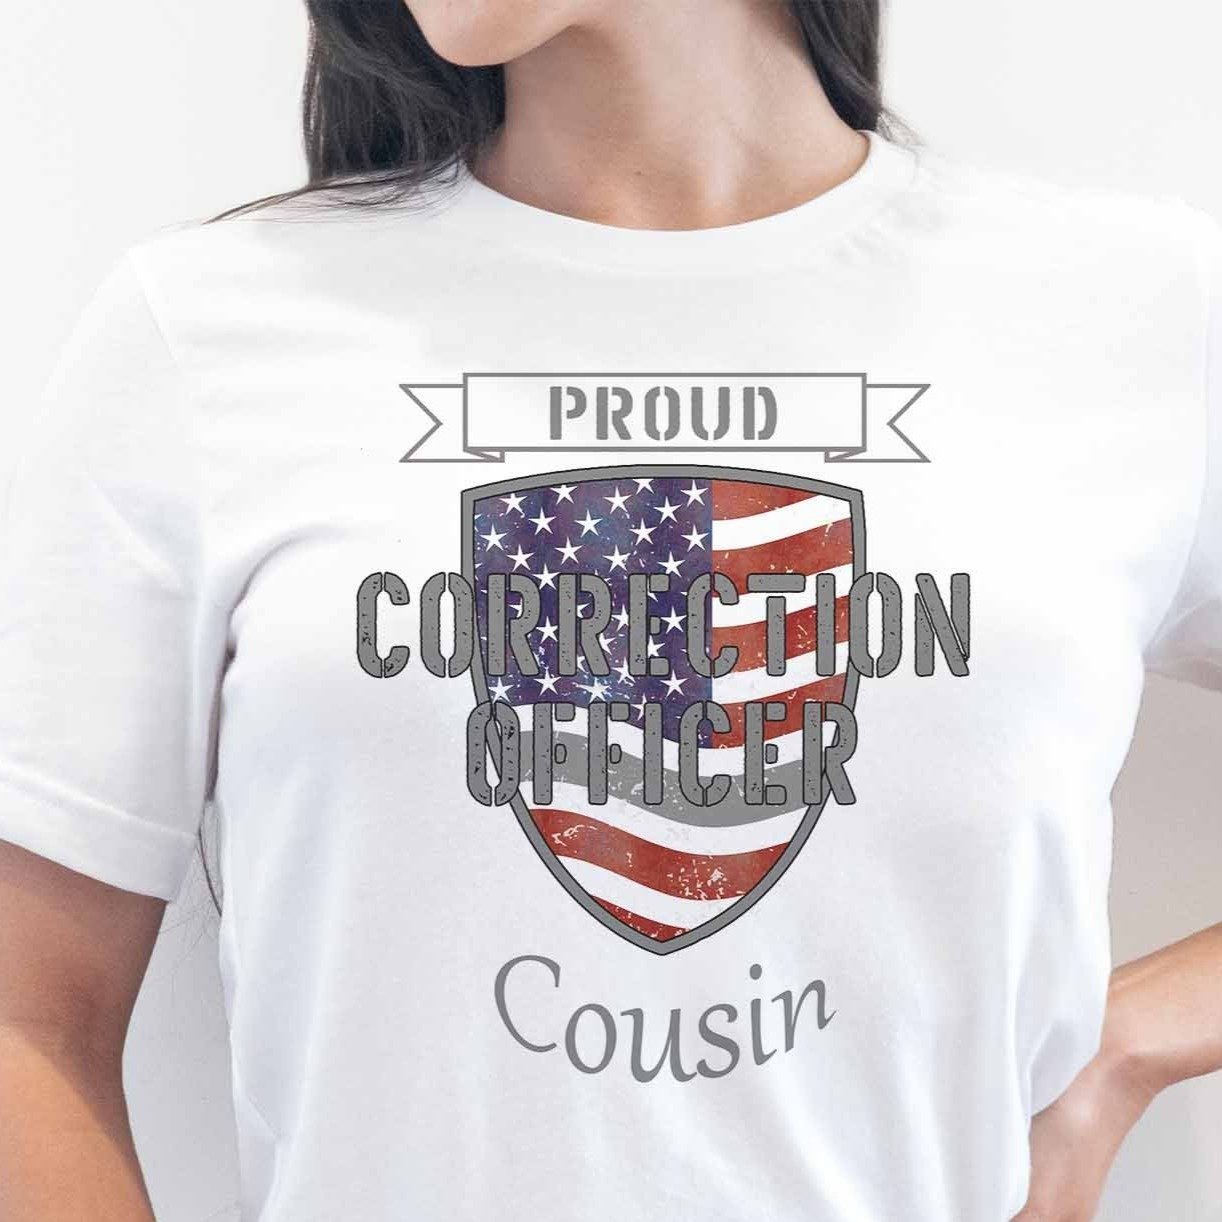 Proud Correction Officer Cousin - My Custom Tee Party